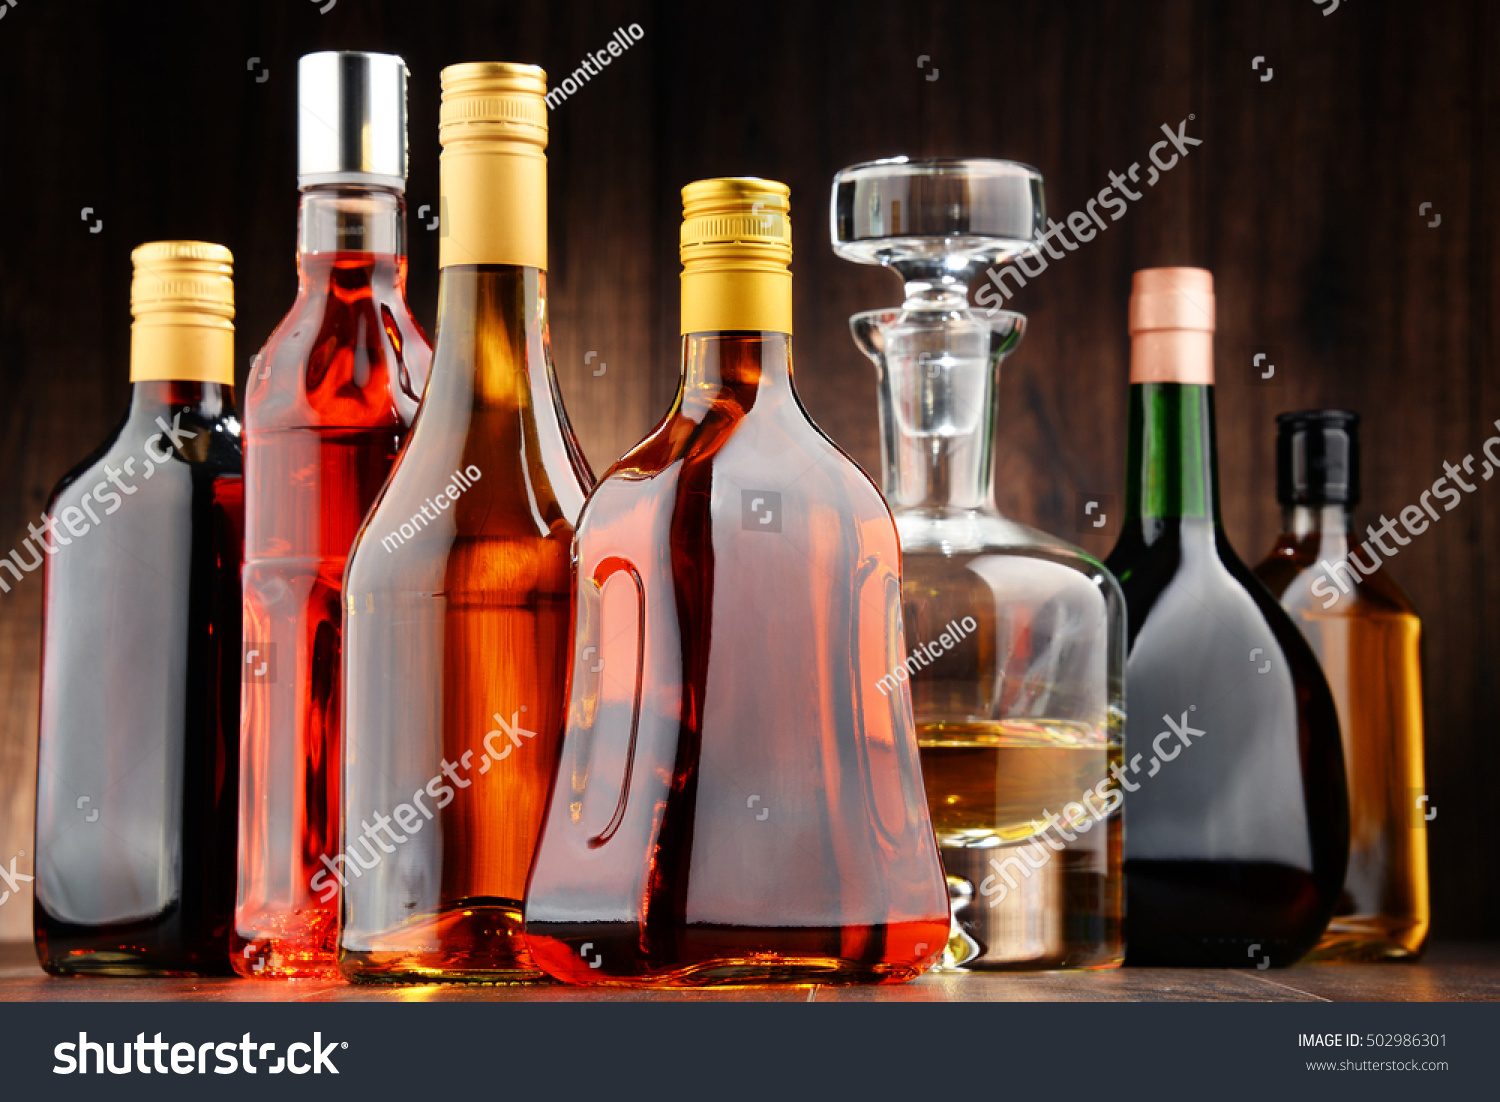 Composition with bottles of assorted alcoholic beverages. #502986301